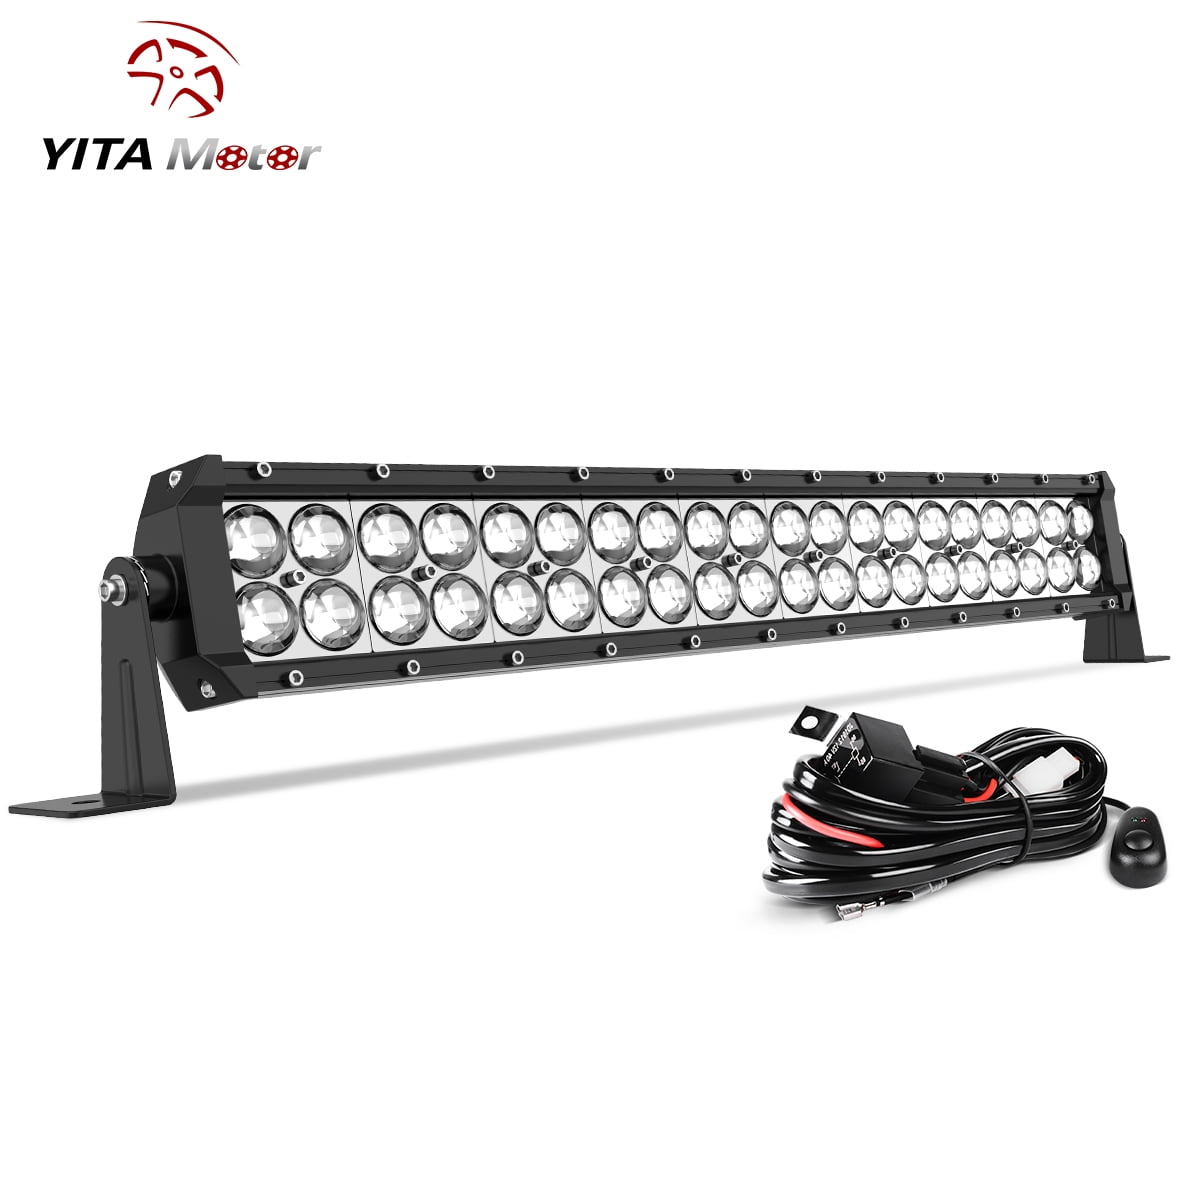 24inch 280W LED Light Bar Curved Spot Flood Offroad Ford Truck 4WD ATV Boat 22'' 